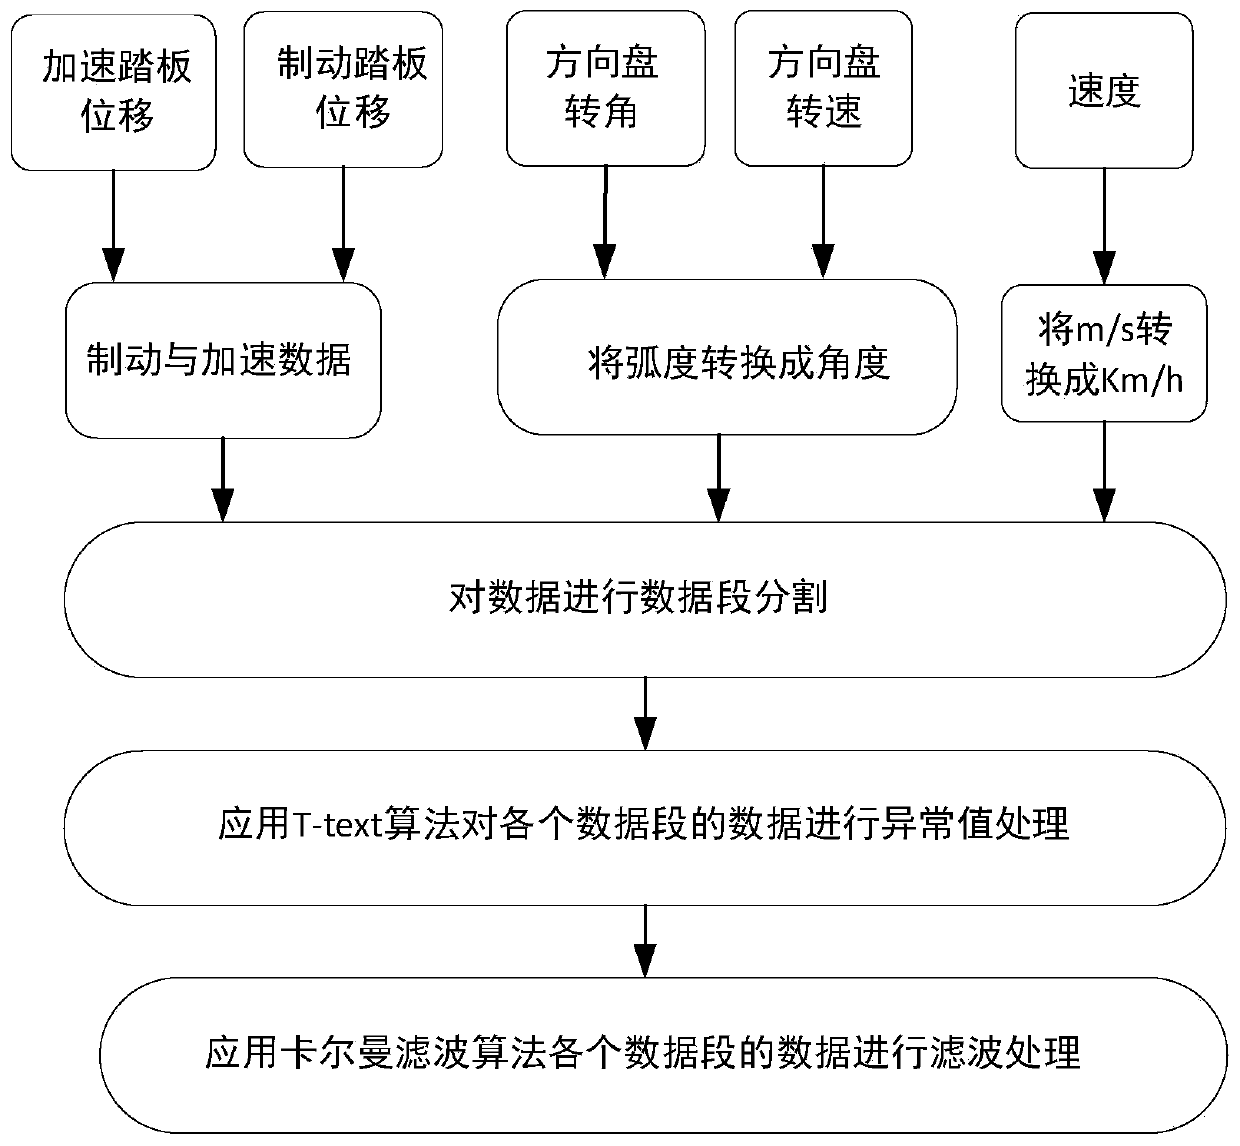 Emergency obstacle avoidance automatic-driving assistance torque calculation method based on intention of driver